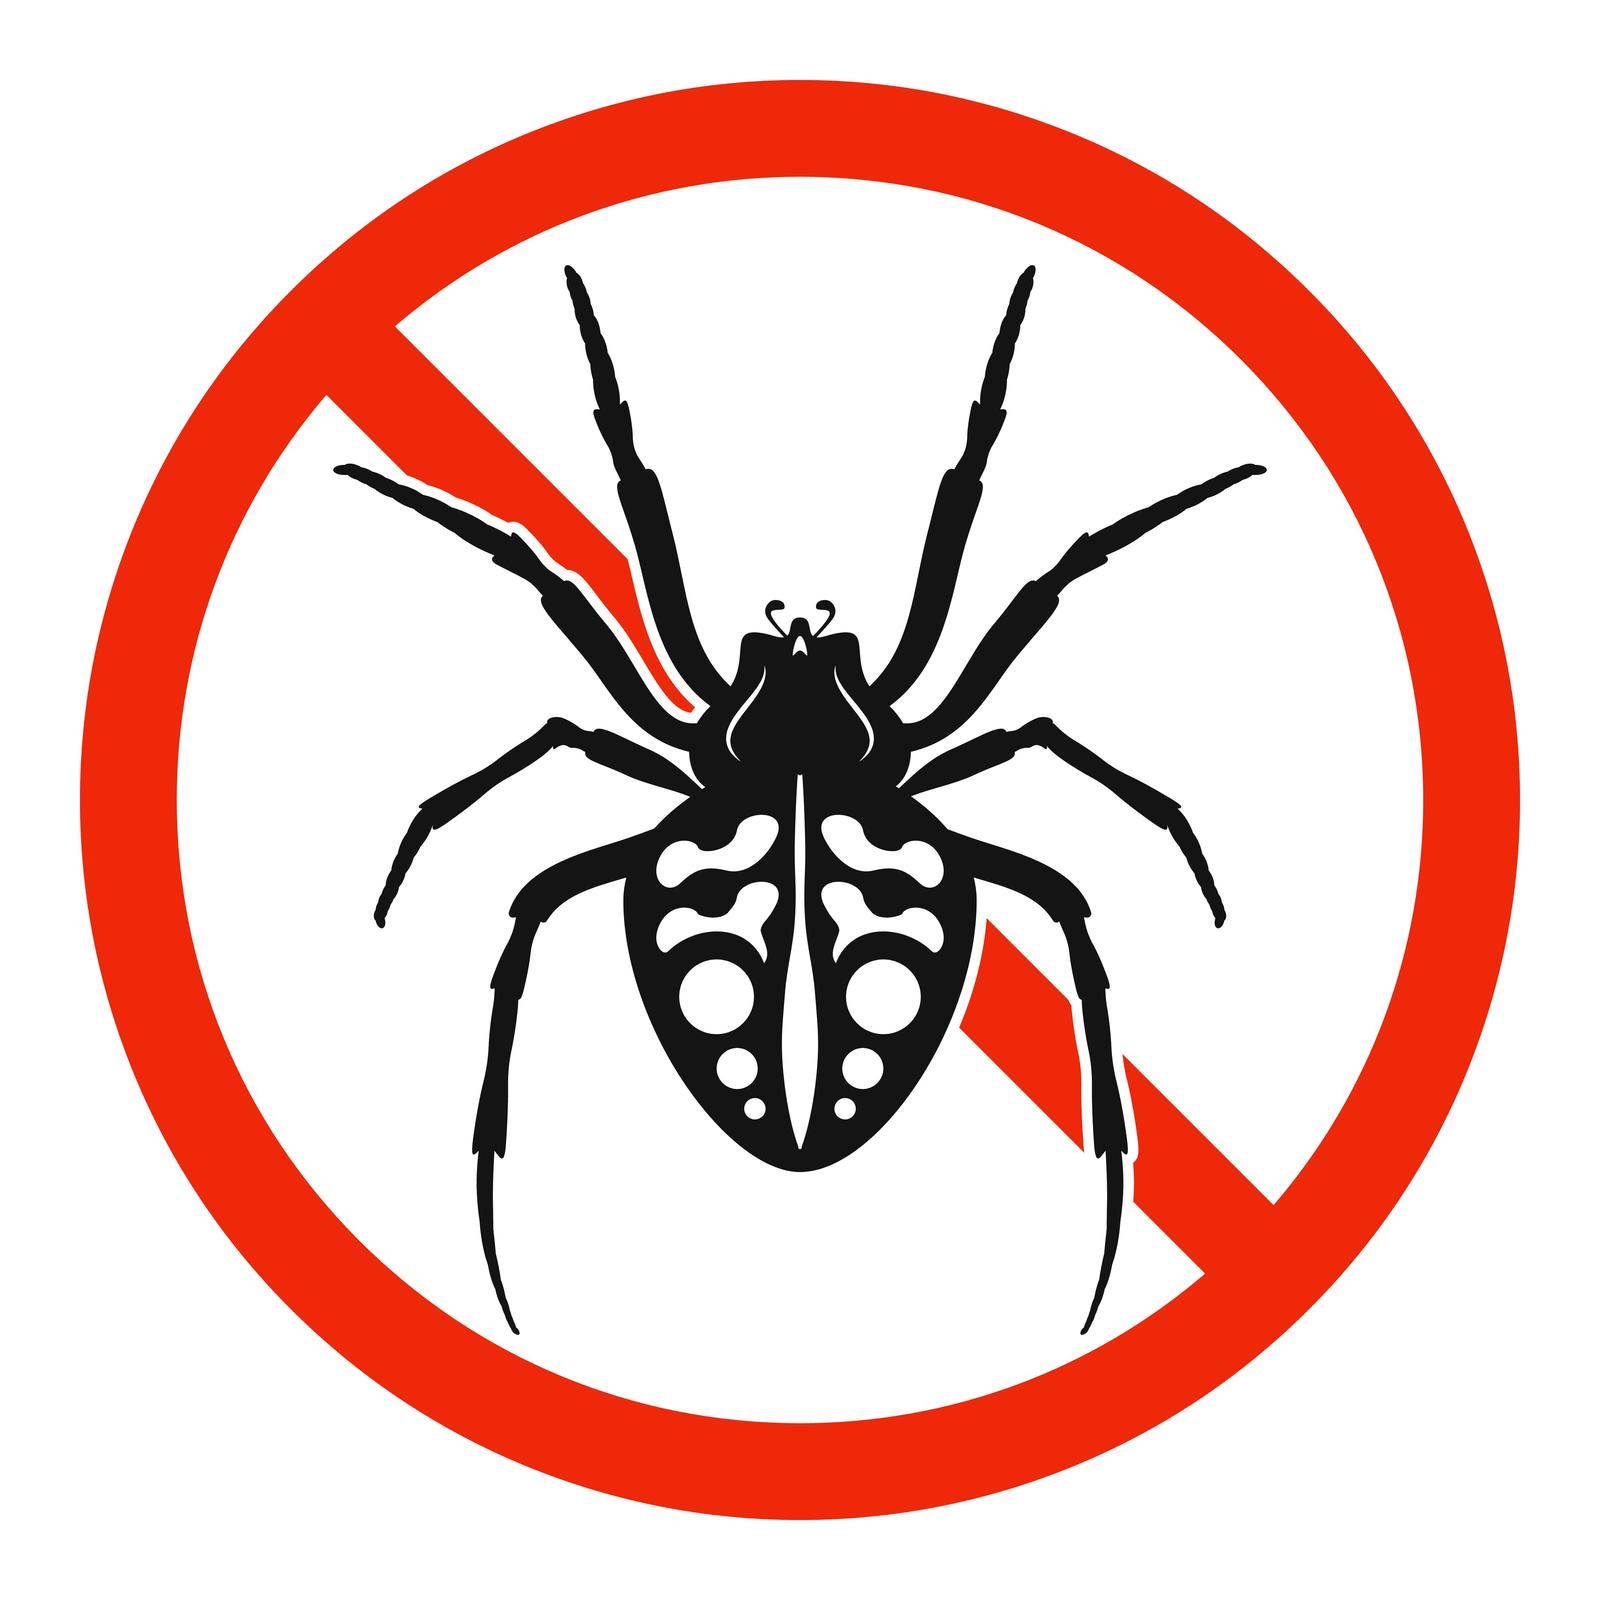 The spider with red ban sign. STOP spider sign by Chekman